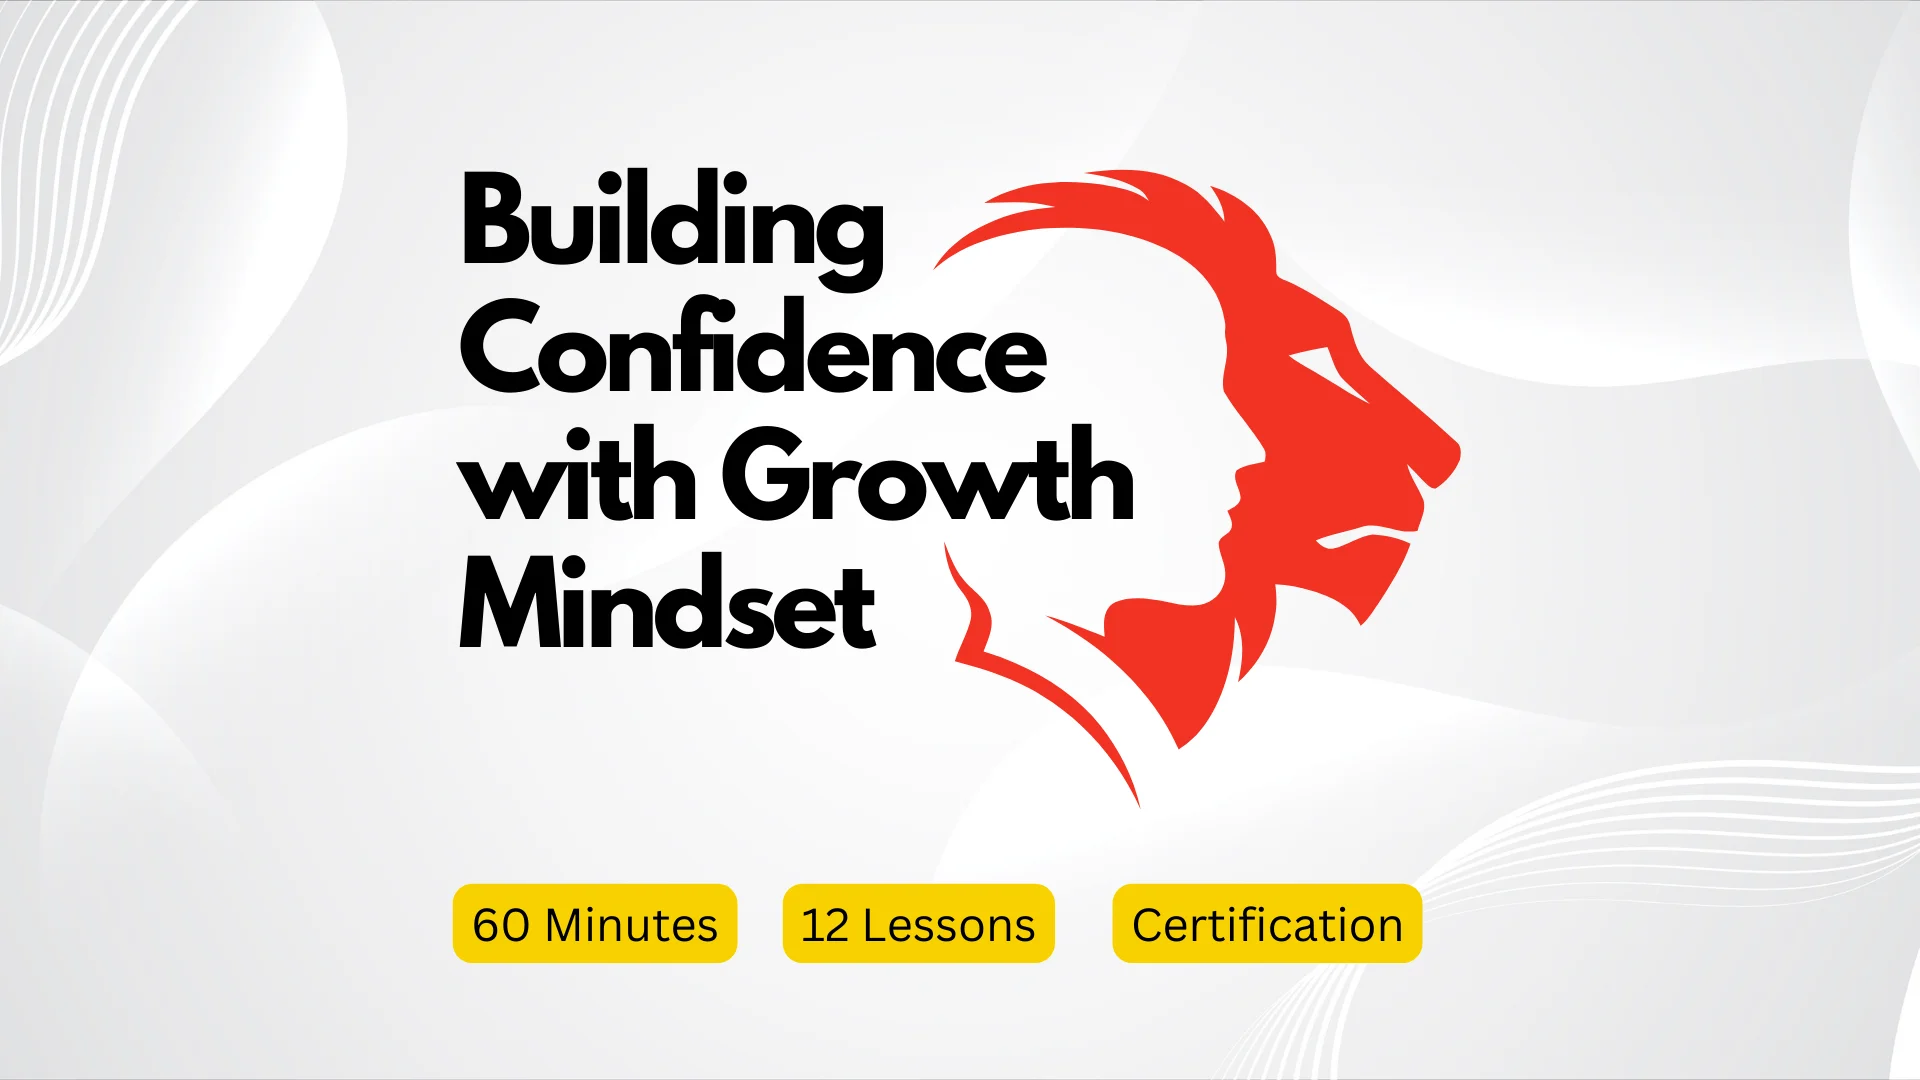 Building Confidence with Growth Mindset Course Image